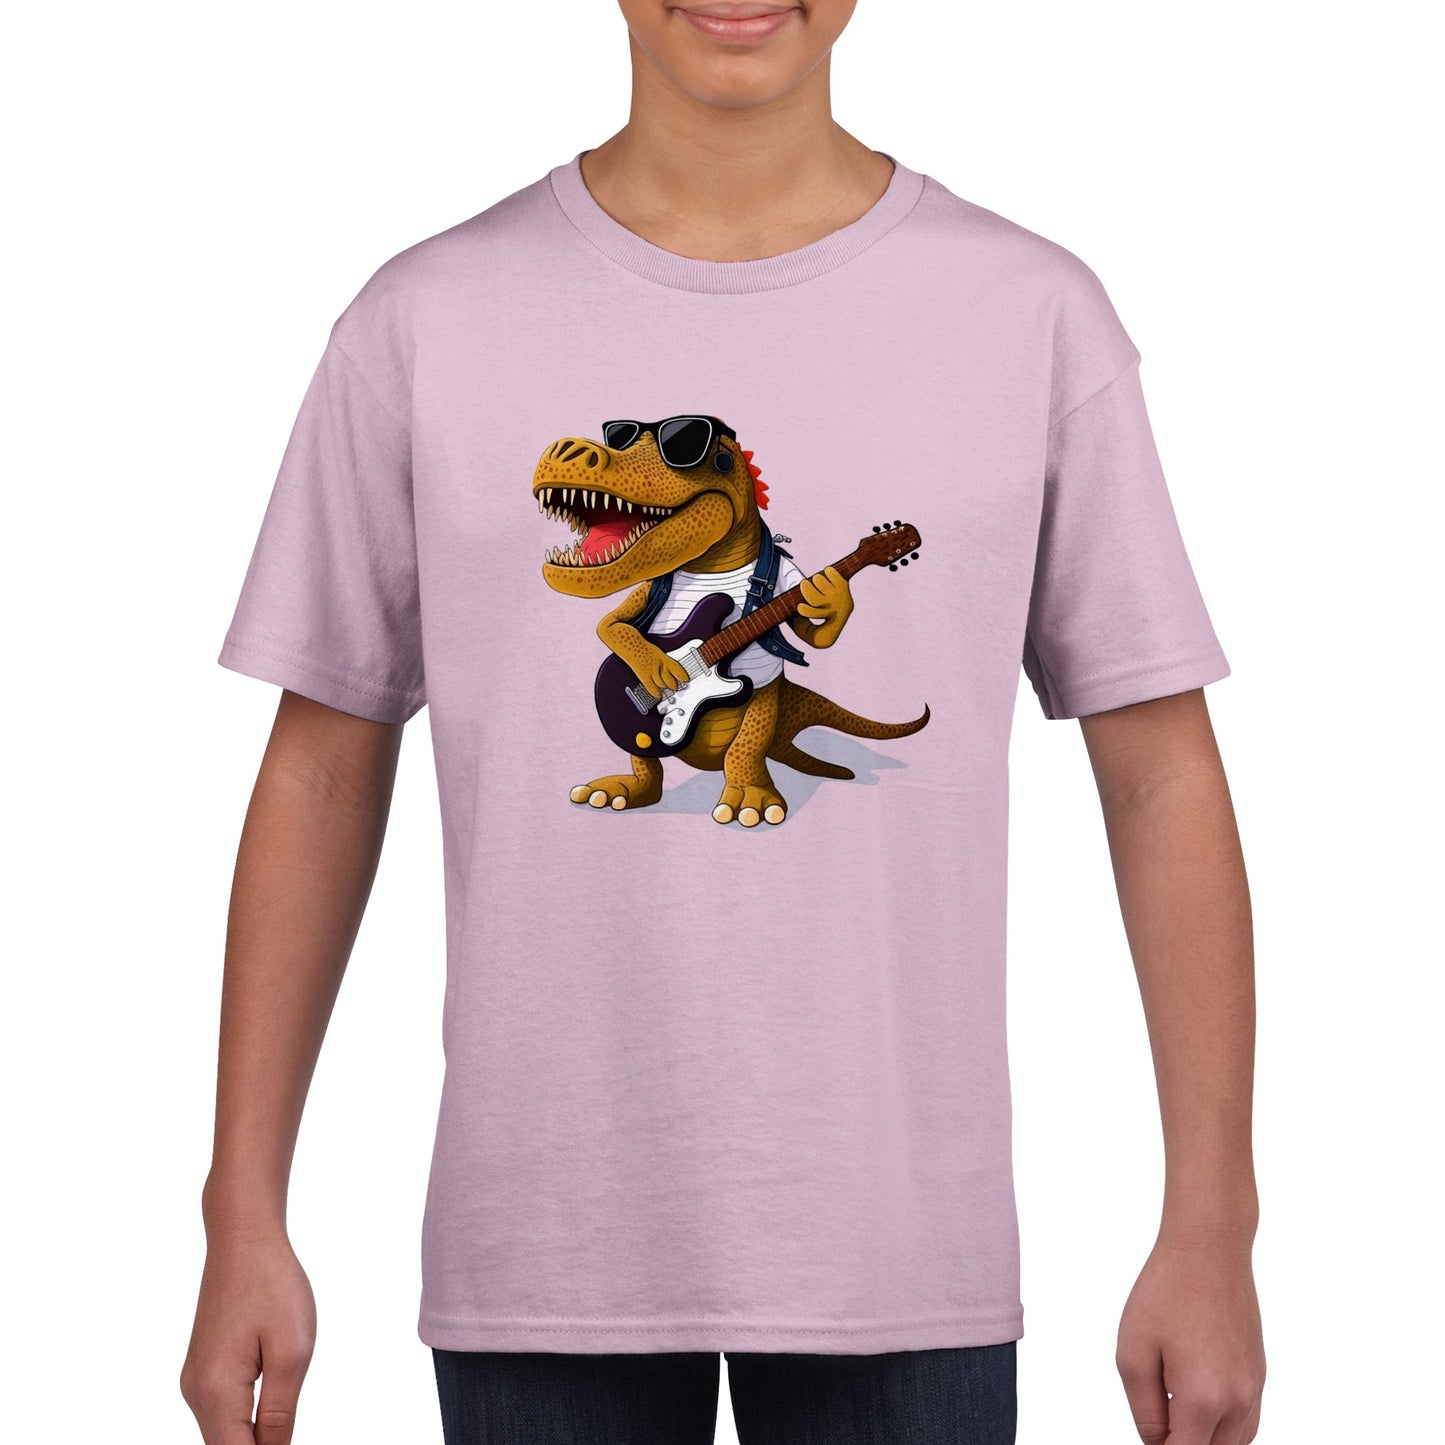 Boy wearing a pink t-shirt with a rockstar dino playing the guitar print